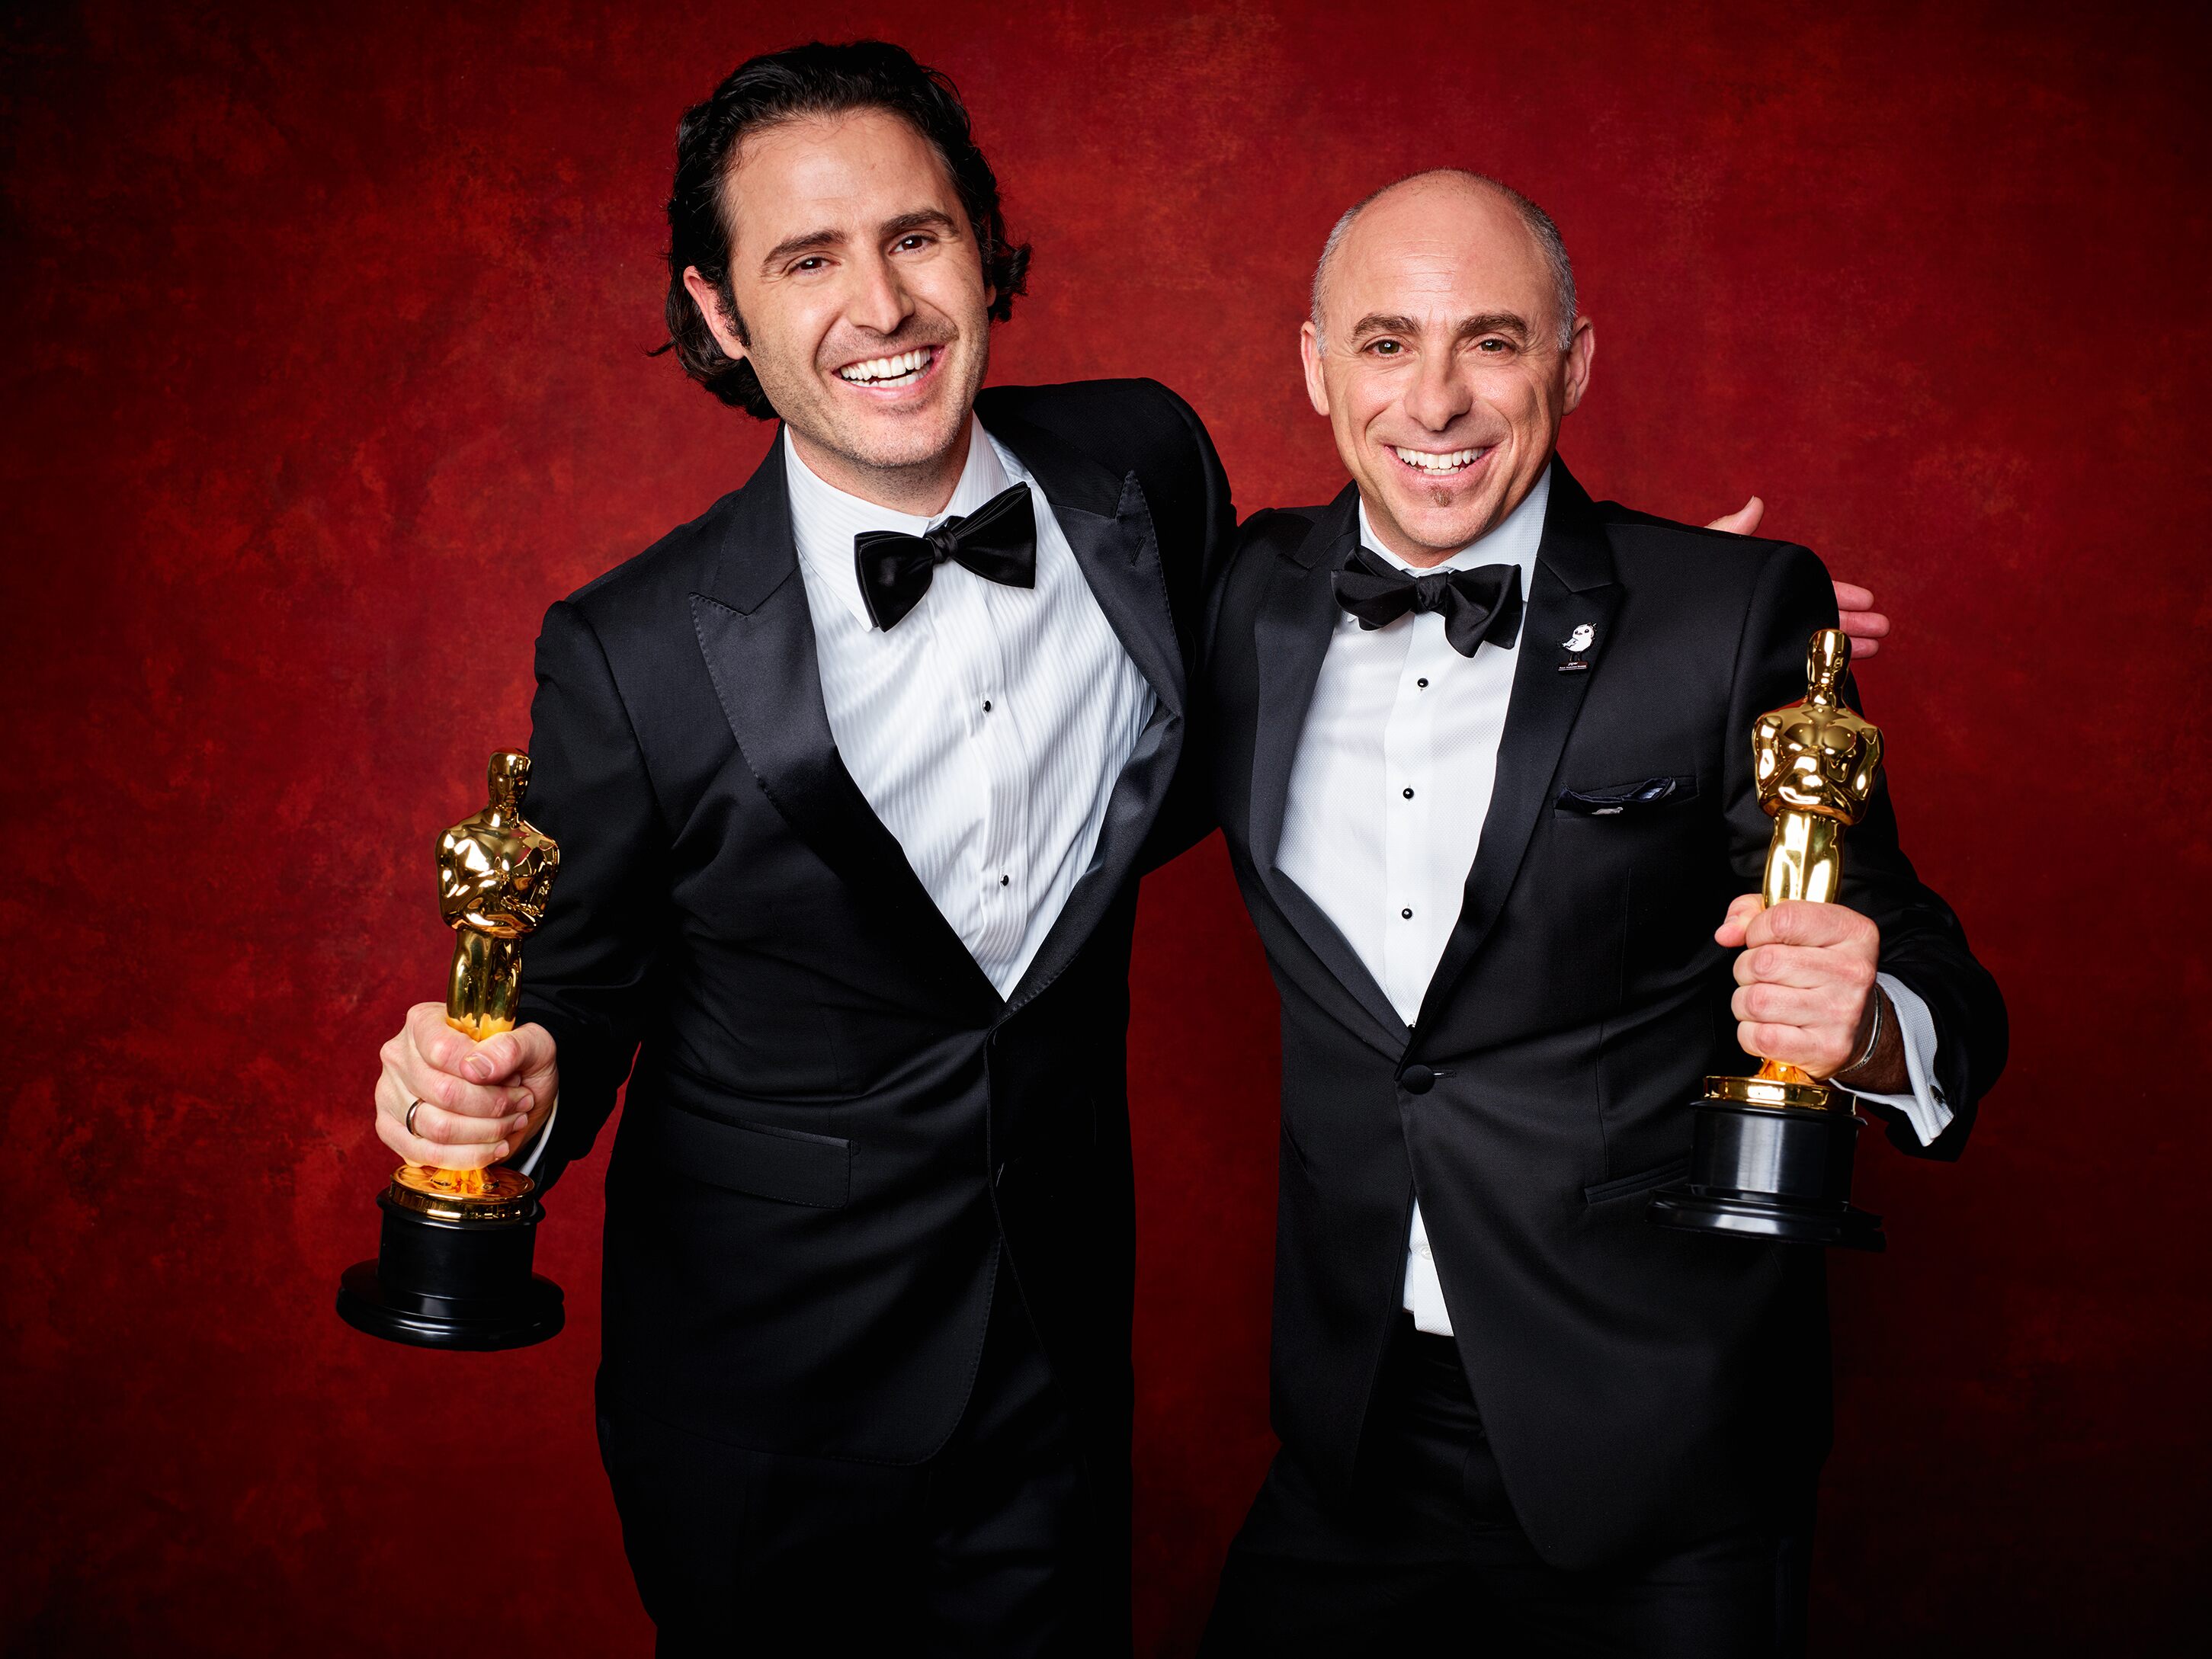 89th Oscar Winner Portraits | Oscars.org | Academy of Motion Picture Arts and Sciences2902 x 2177